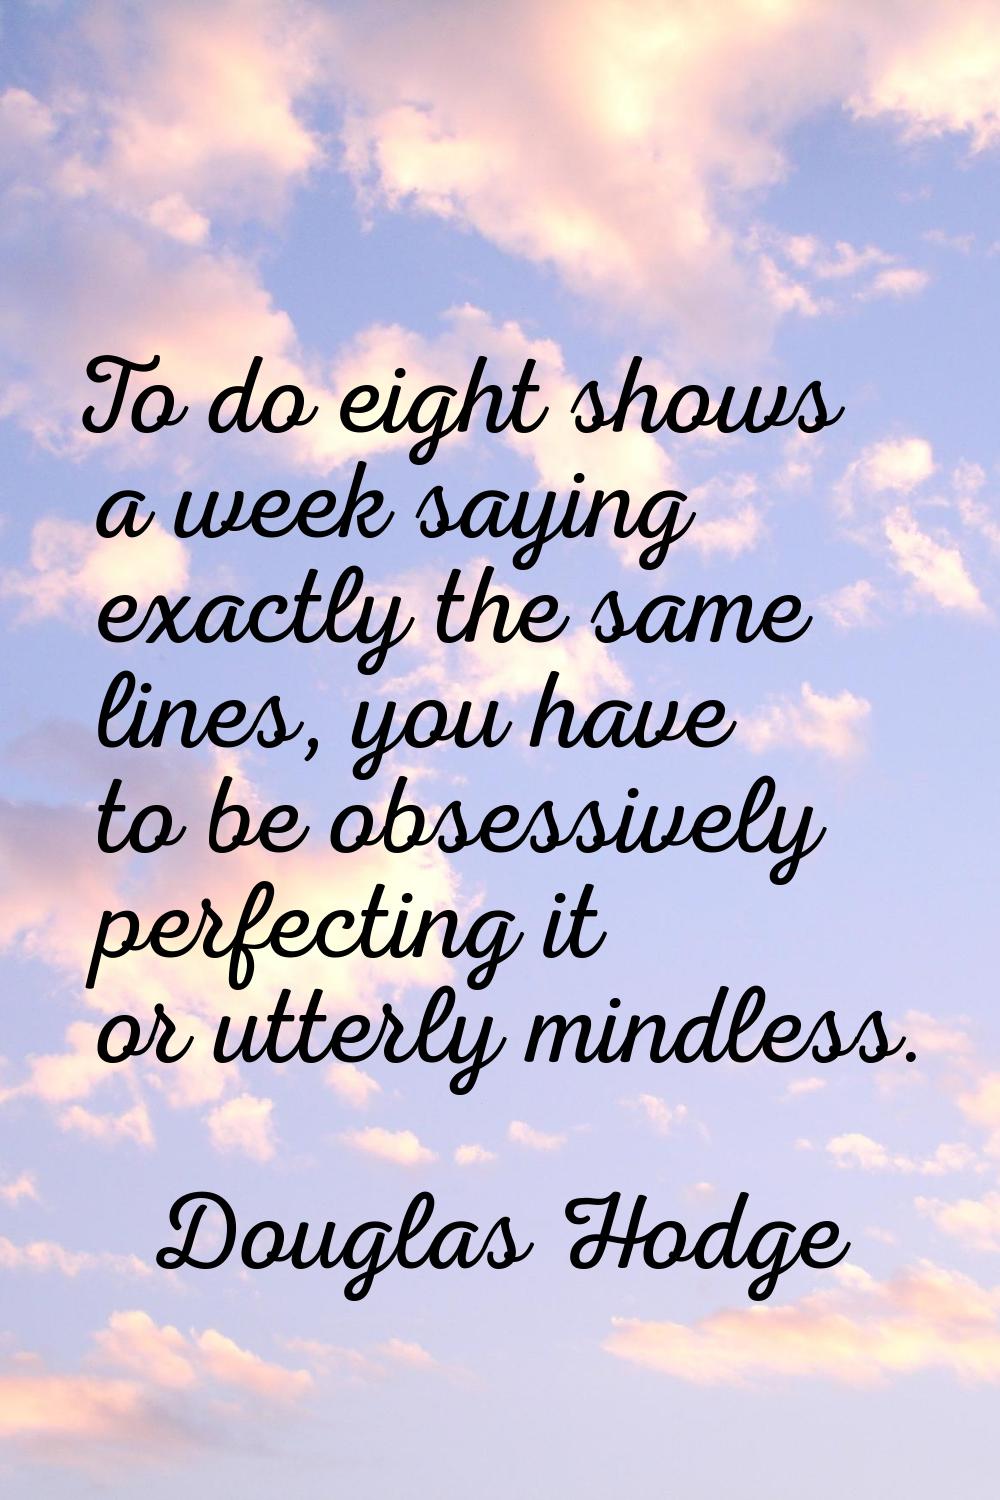 To do eight shows a week saying exactly the same lines, you have to be obsessively perfecting it or